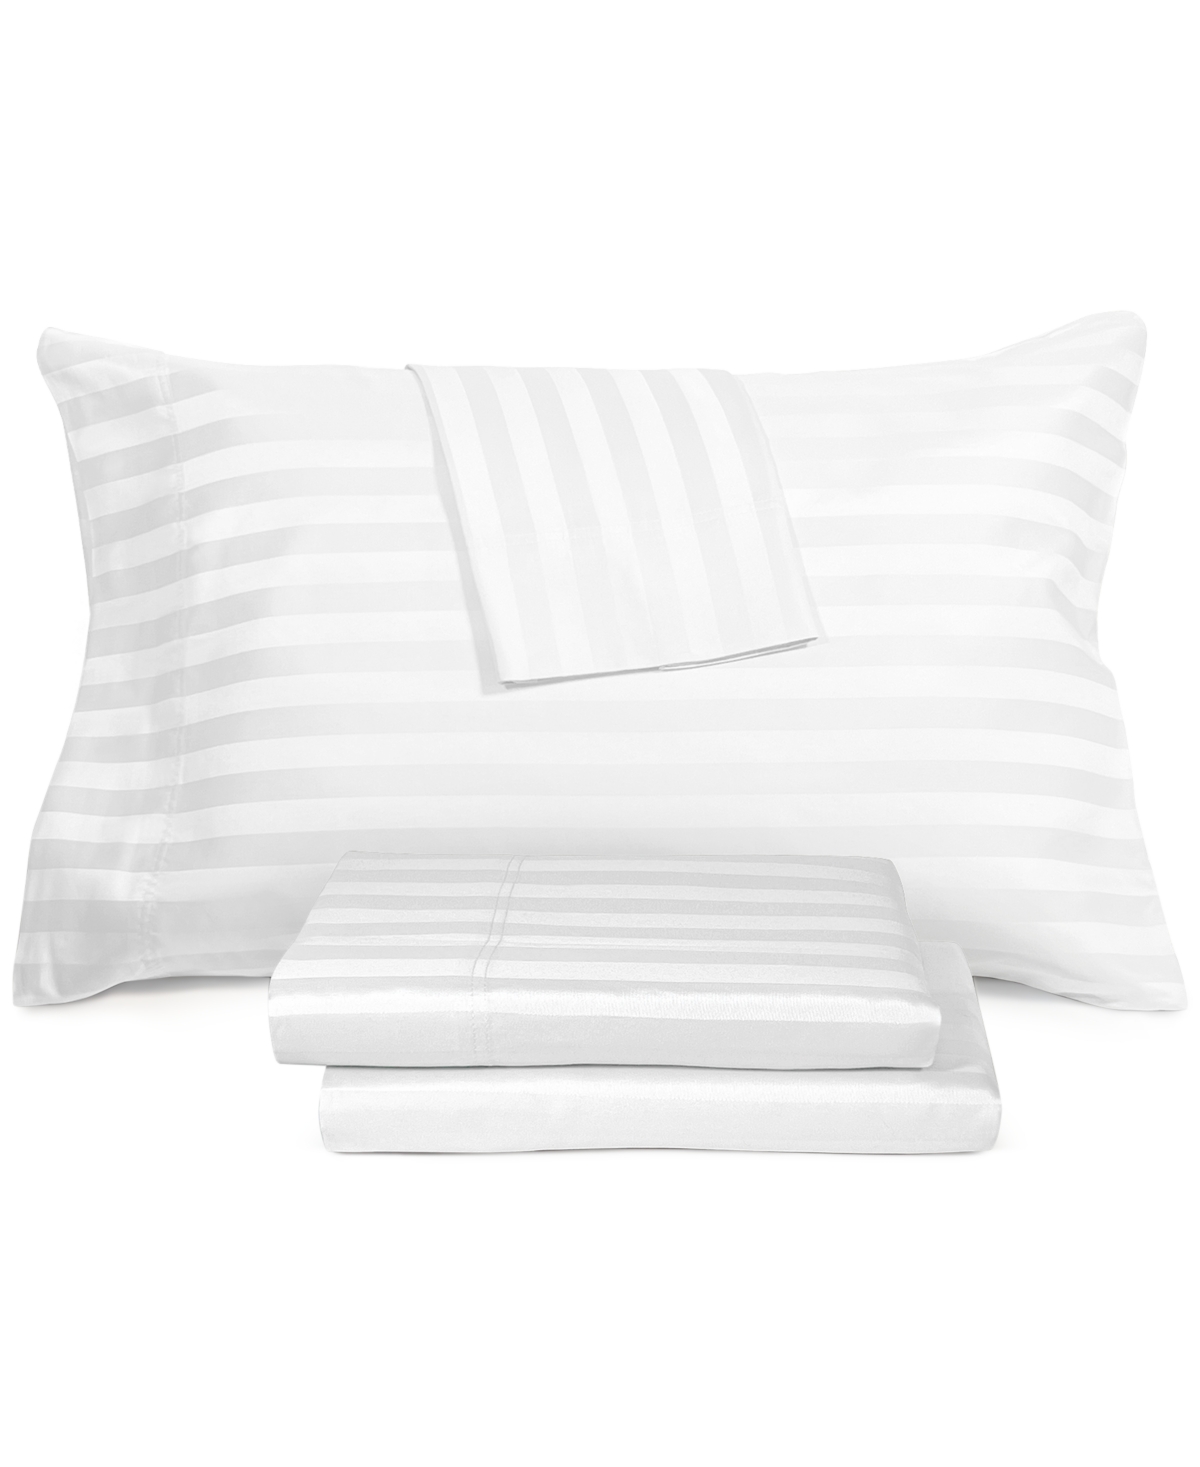 Aq Textiles Ultra Lux Wide Stripe 1000-Thread Count 4-Pc. King Sheet Set Bedding